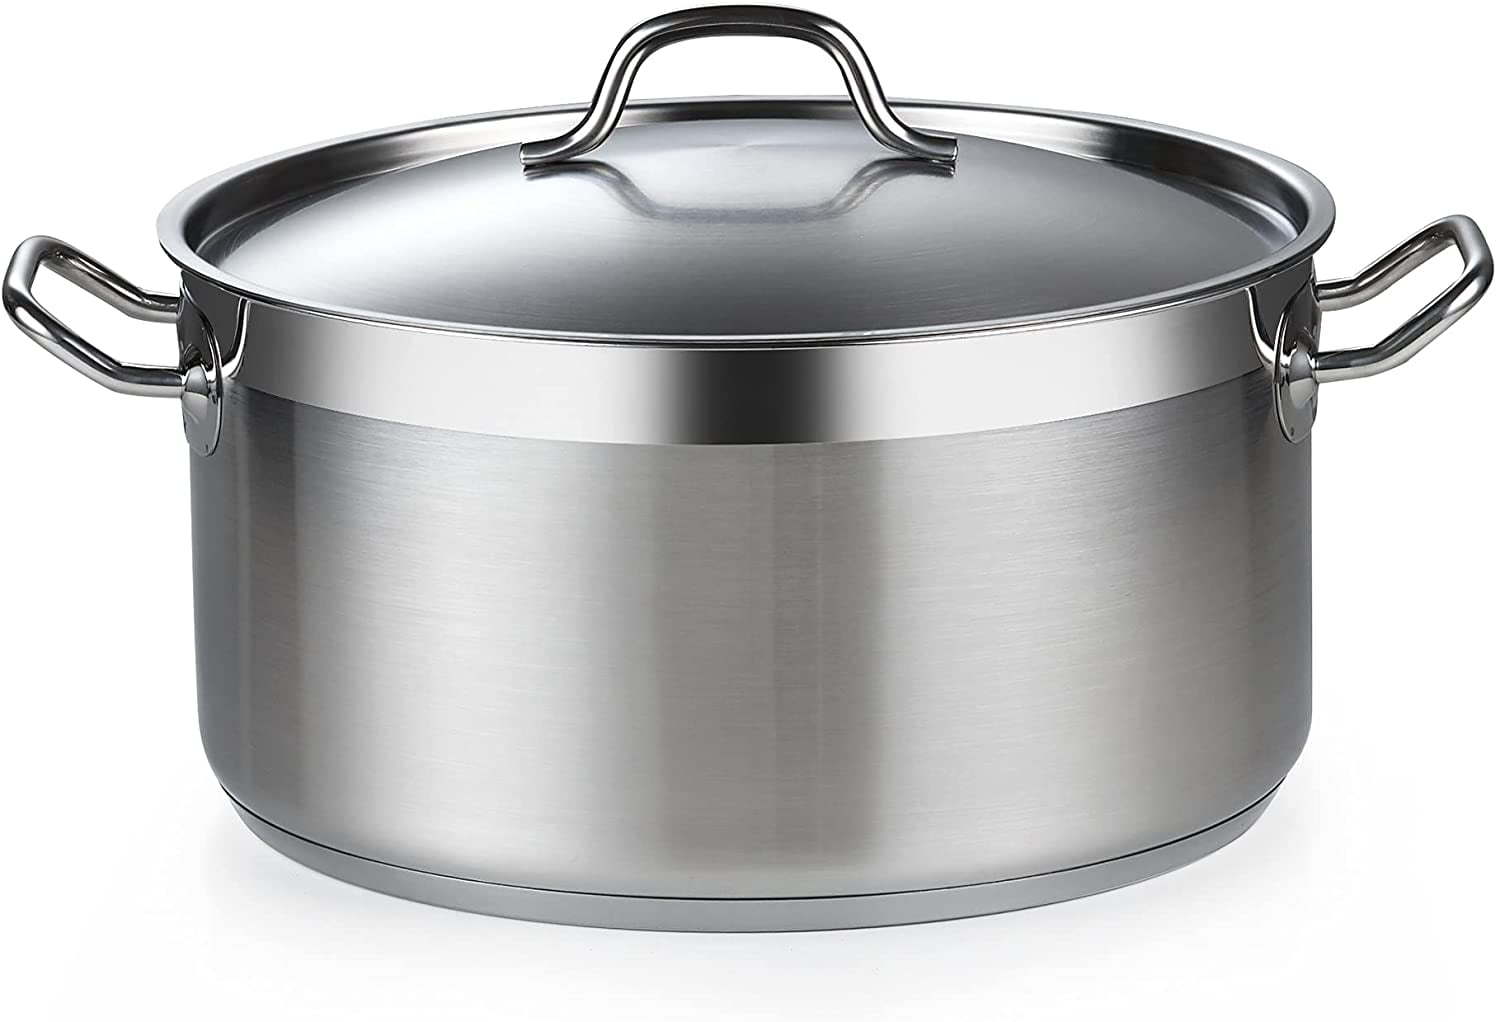 Stainless Steel Cookware Stock Pot with Glass Lid, Large Pot Capacity for  Soup, Sauce - China Stainless Steel Casserole and Stainless Steel Cookware  price